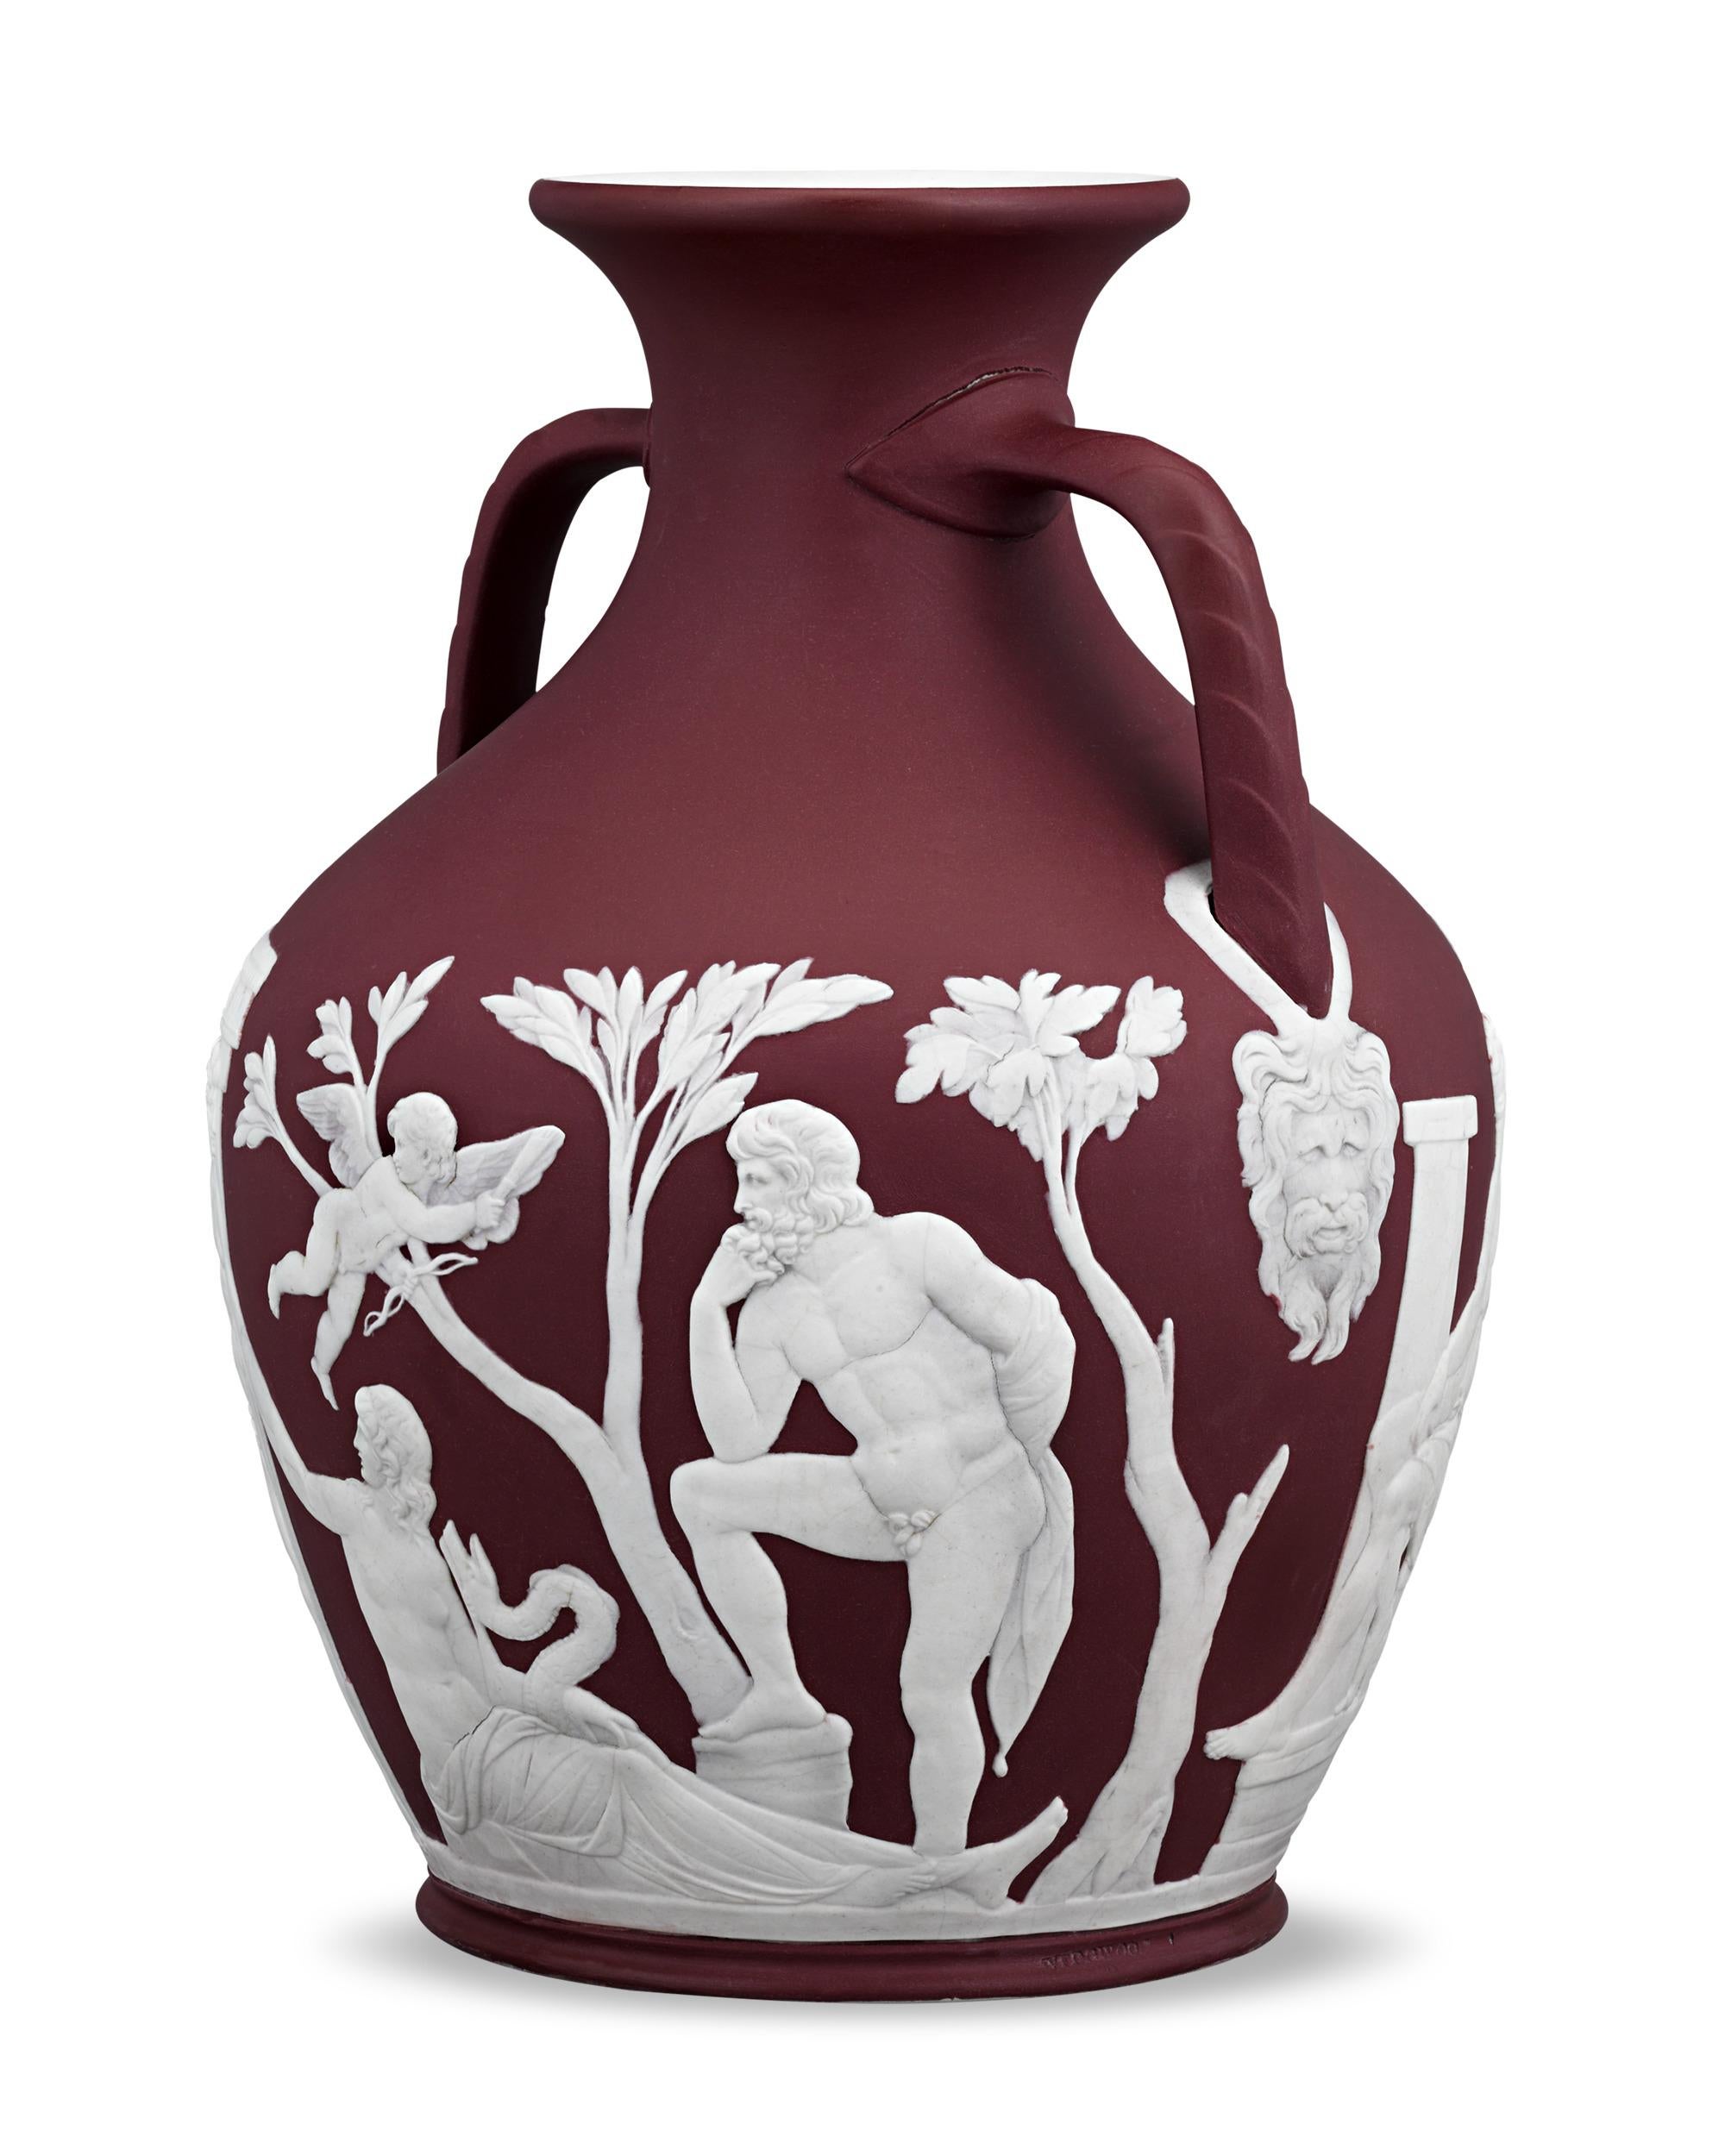 This remarkably rare Portland Vase by Wedgwood boasts a highly coveted crimson hue. As the vivid red coloring was difficult to control and prone to bleeding, crimson dip jasperware was only produced by the manufactory for a brief period, making it